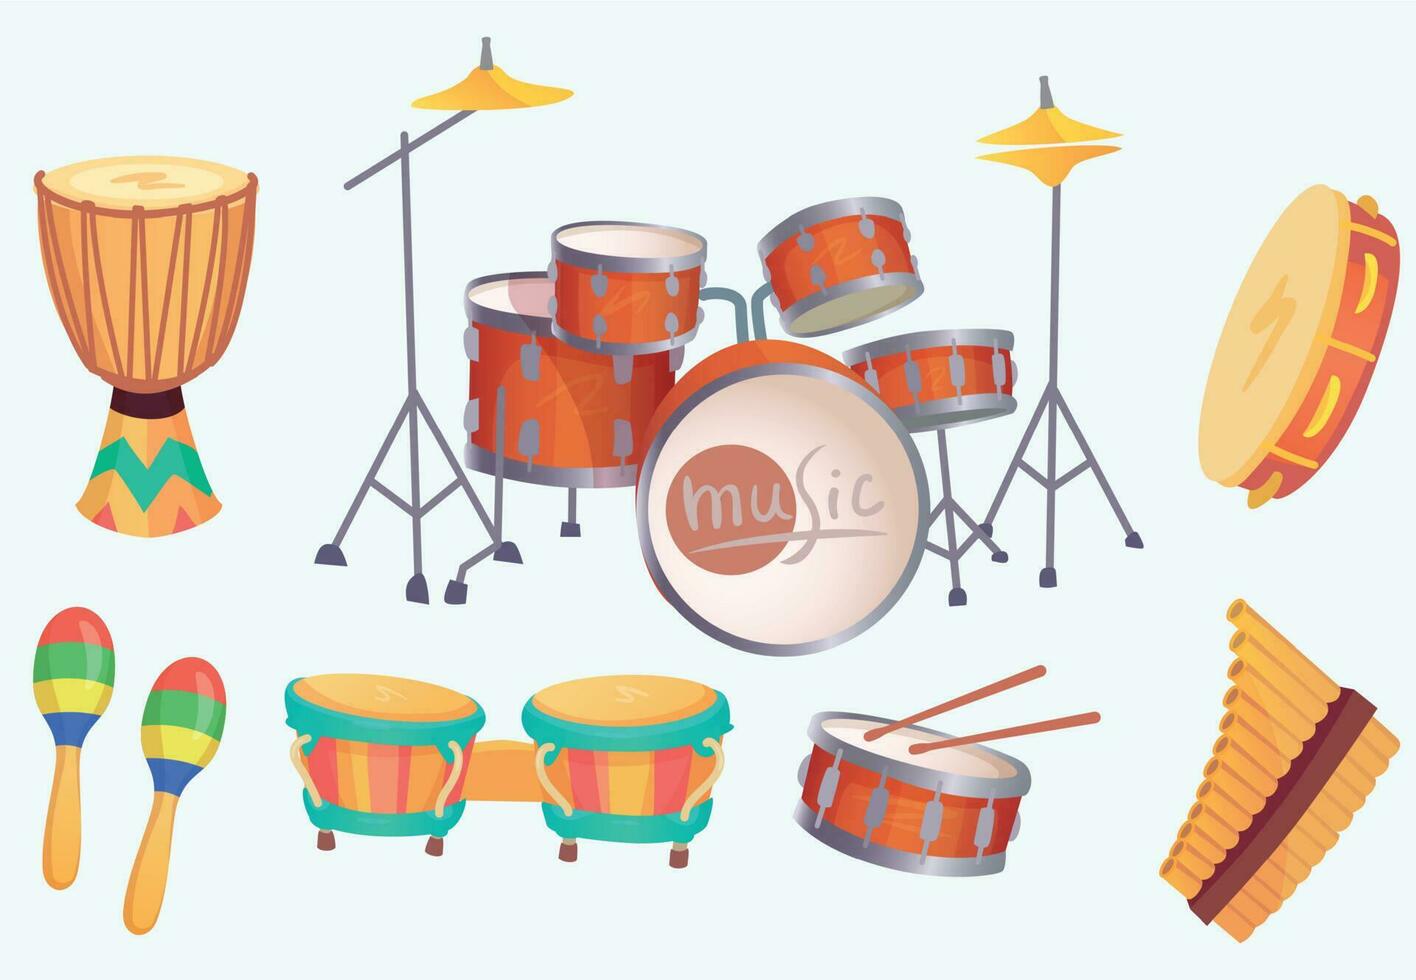 Cartoon drums. Musical drum instruments. Music instrument vector isolated collection